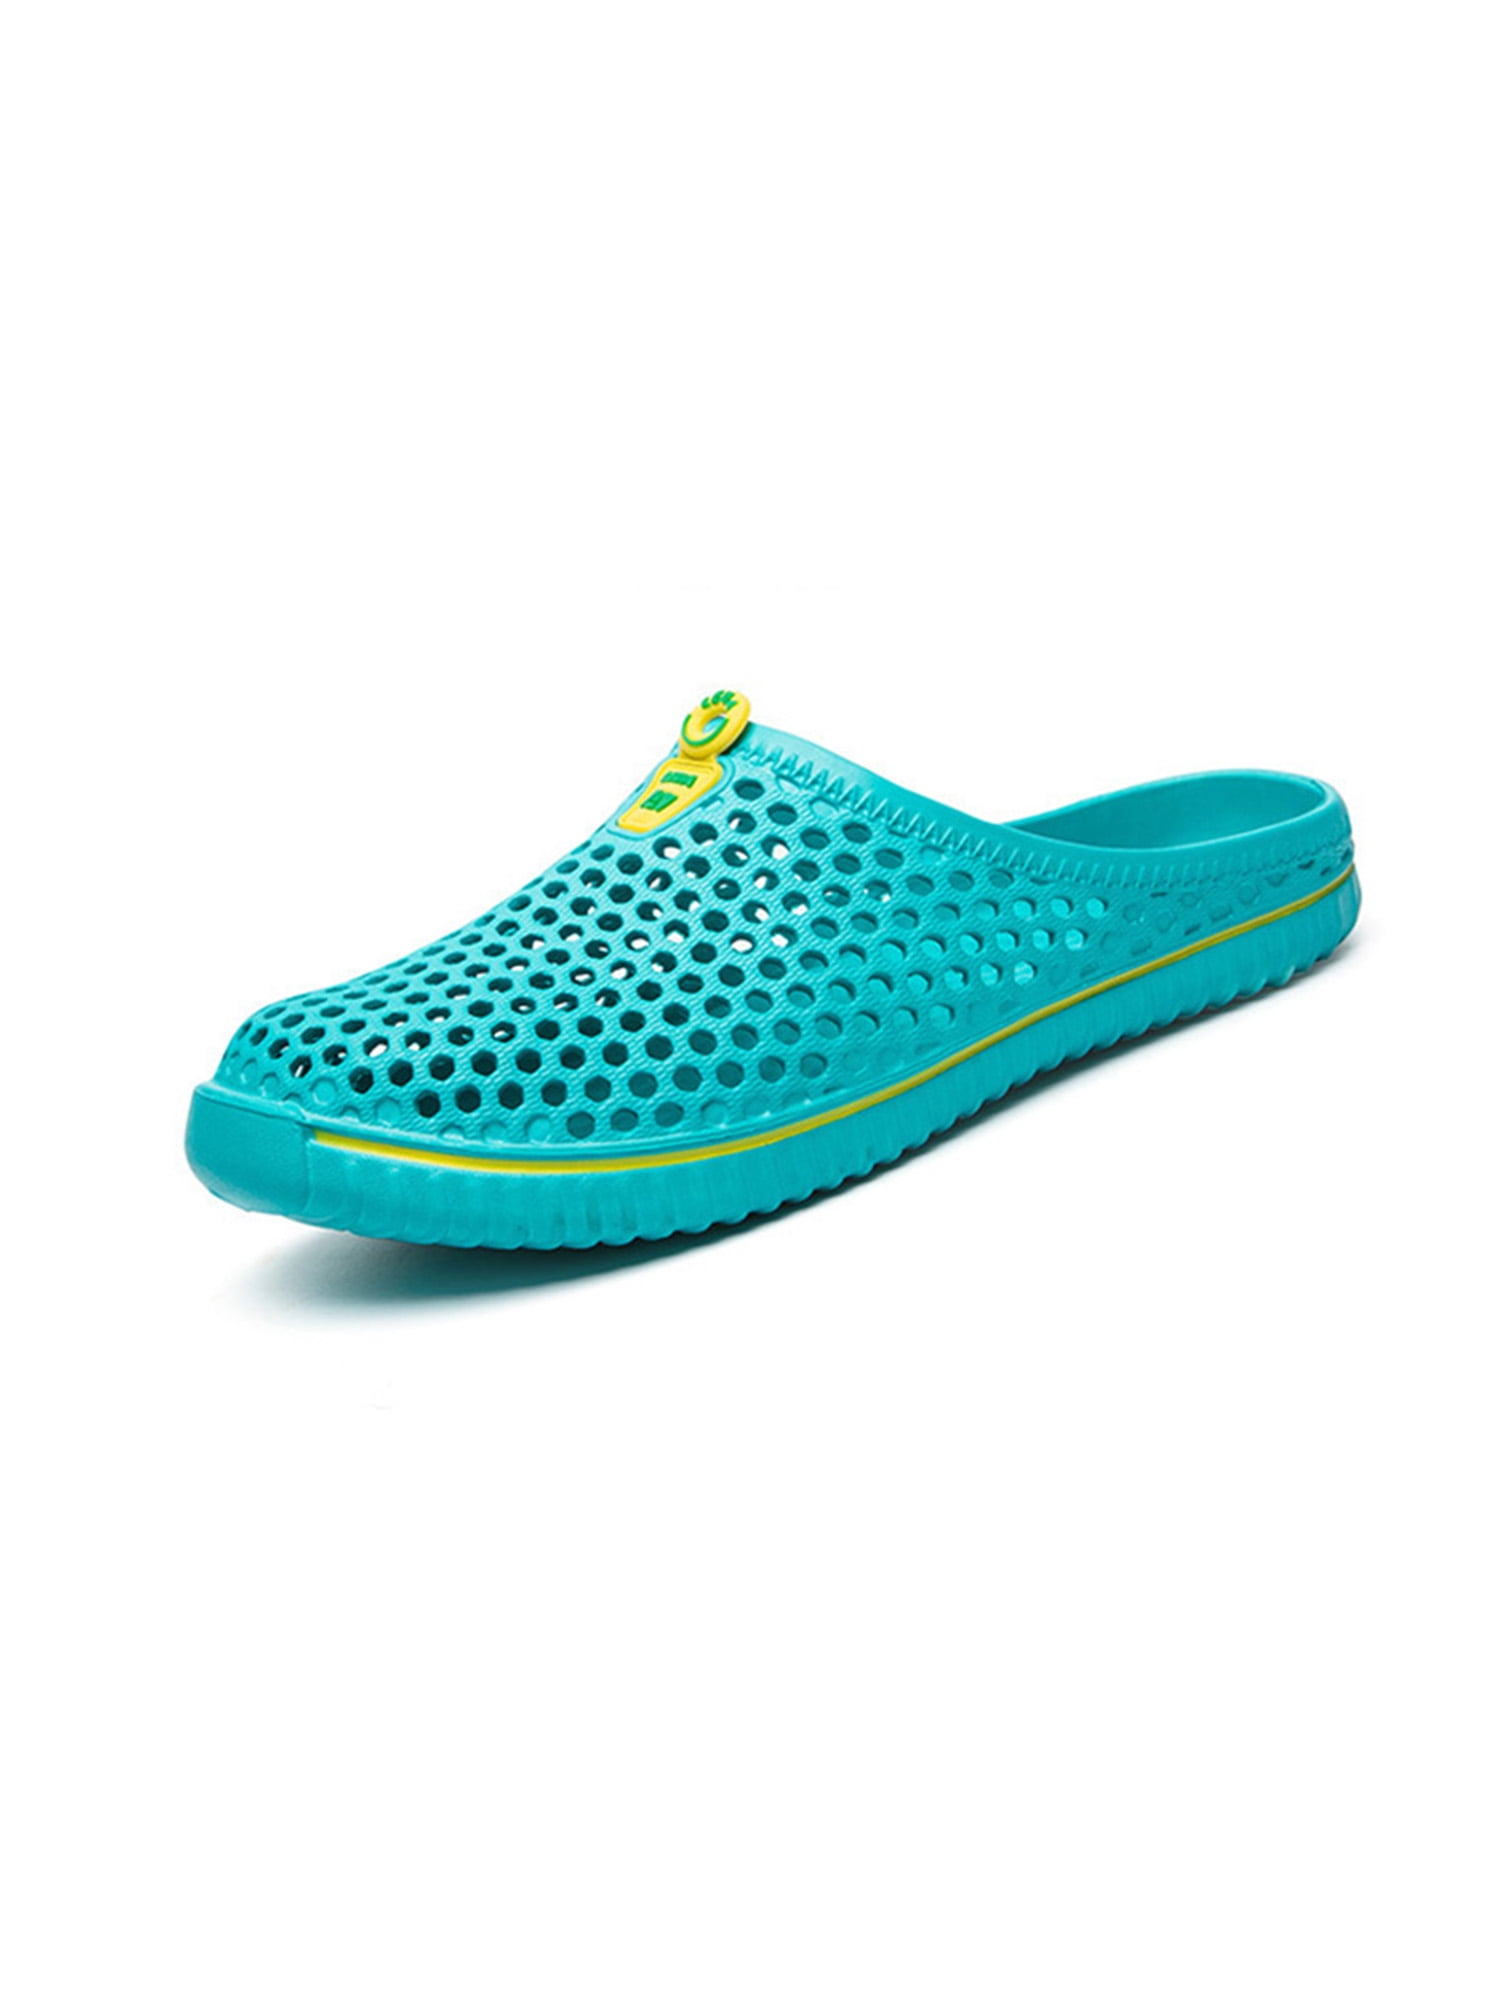 Women's Garden Clogs Breathable Shoes Bathing Shoes Beach Shoes Water Shoes Footwear Slippers Walking Shoes